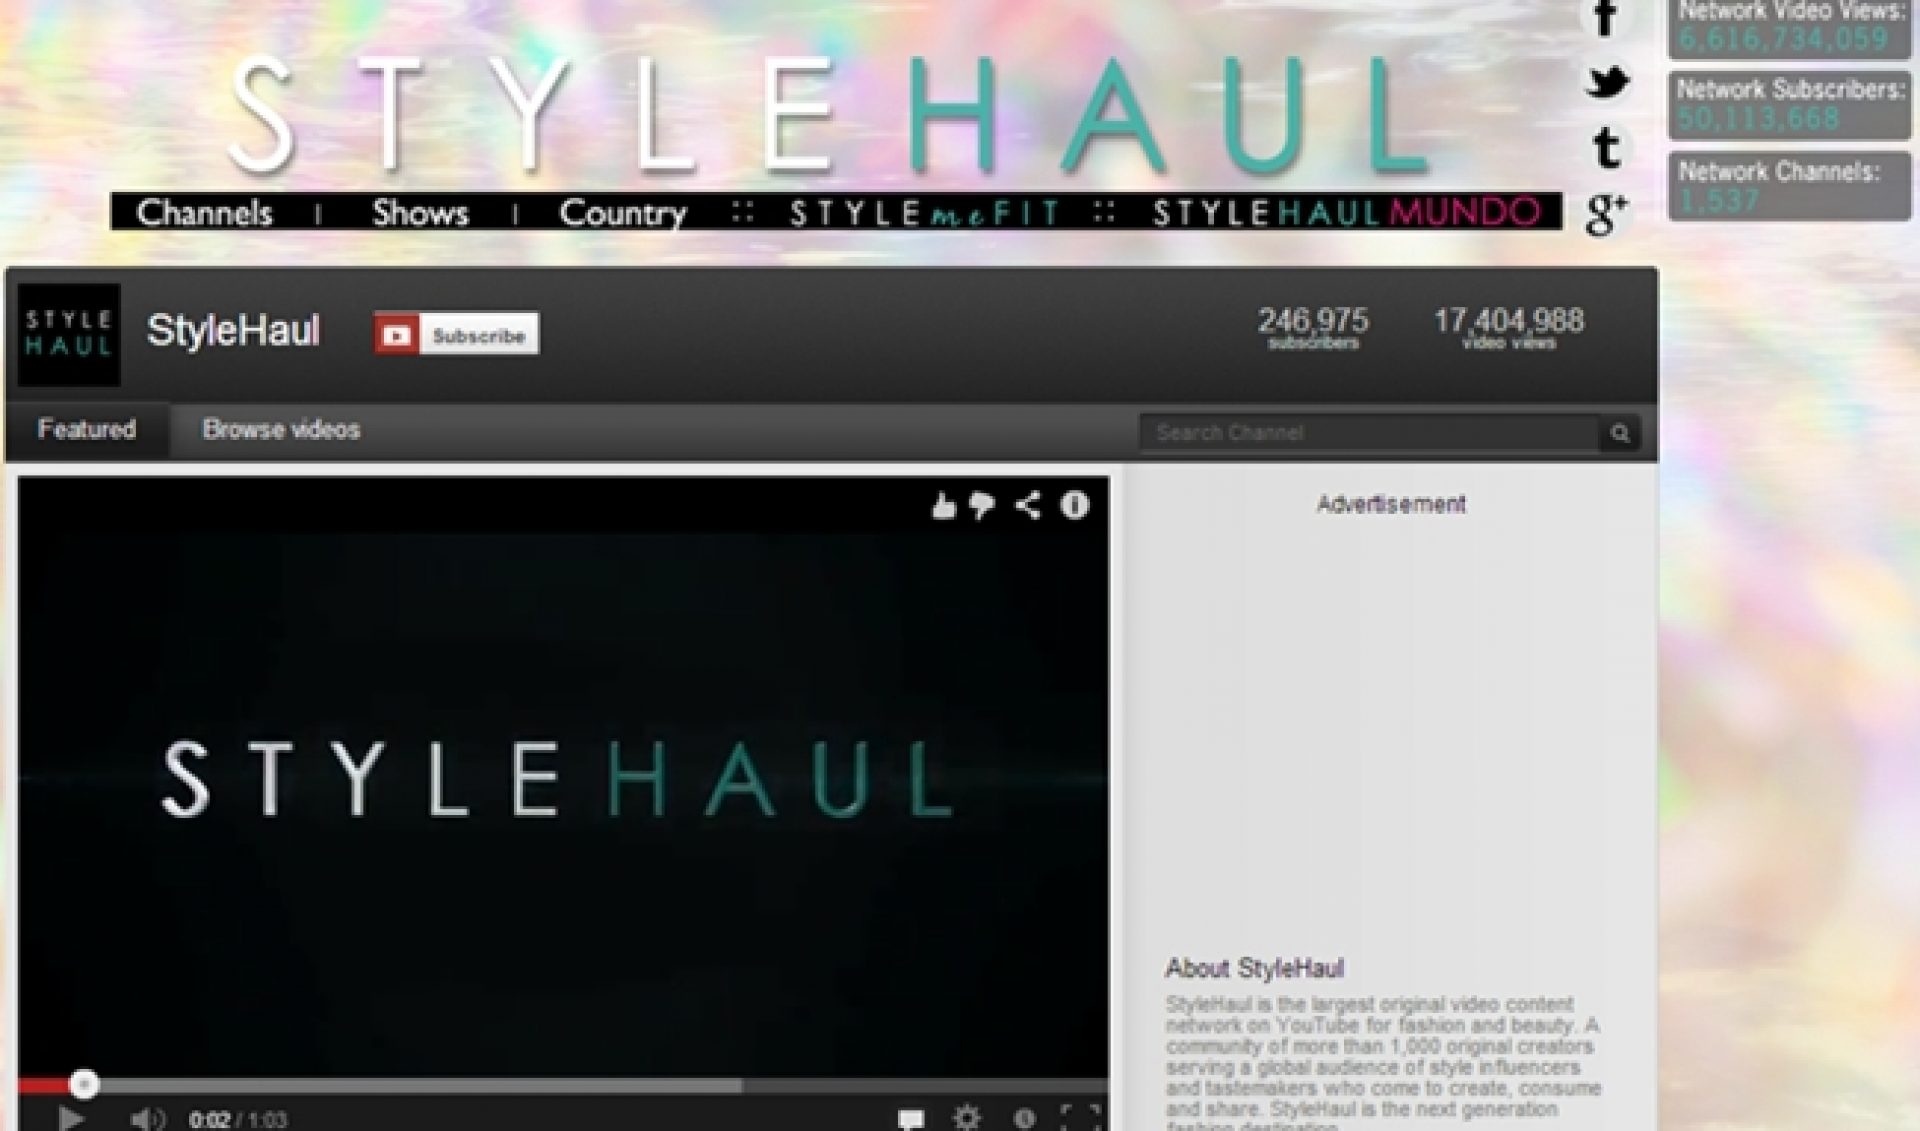 StyleHaul Looks To Become Top Network With $6.5 Million Funding Round